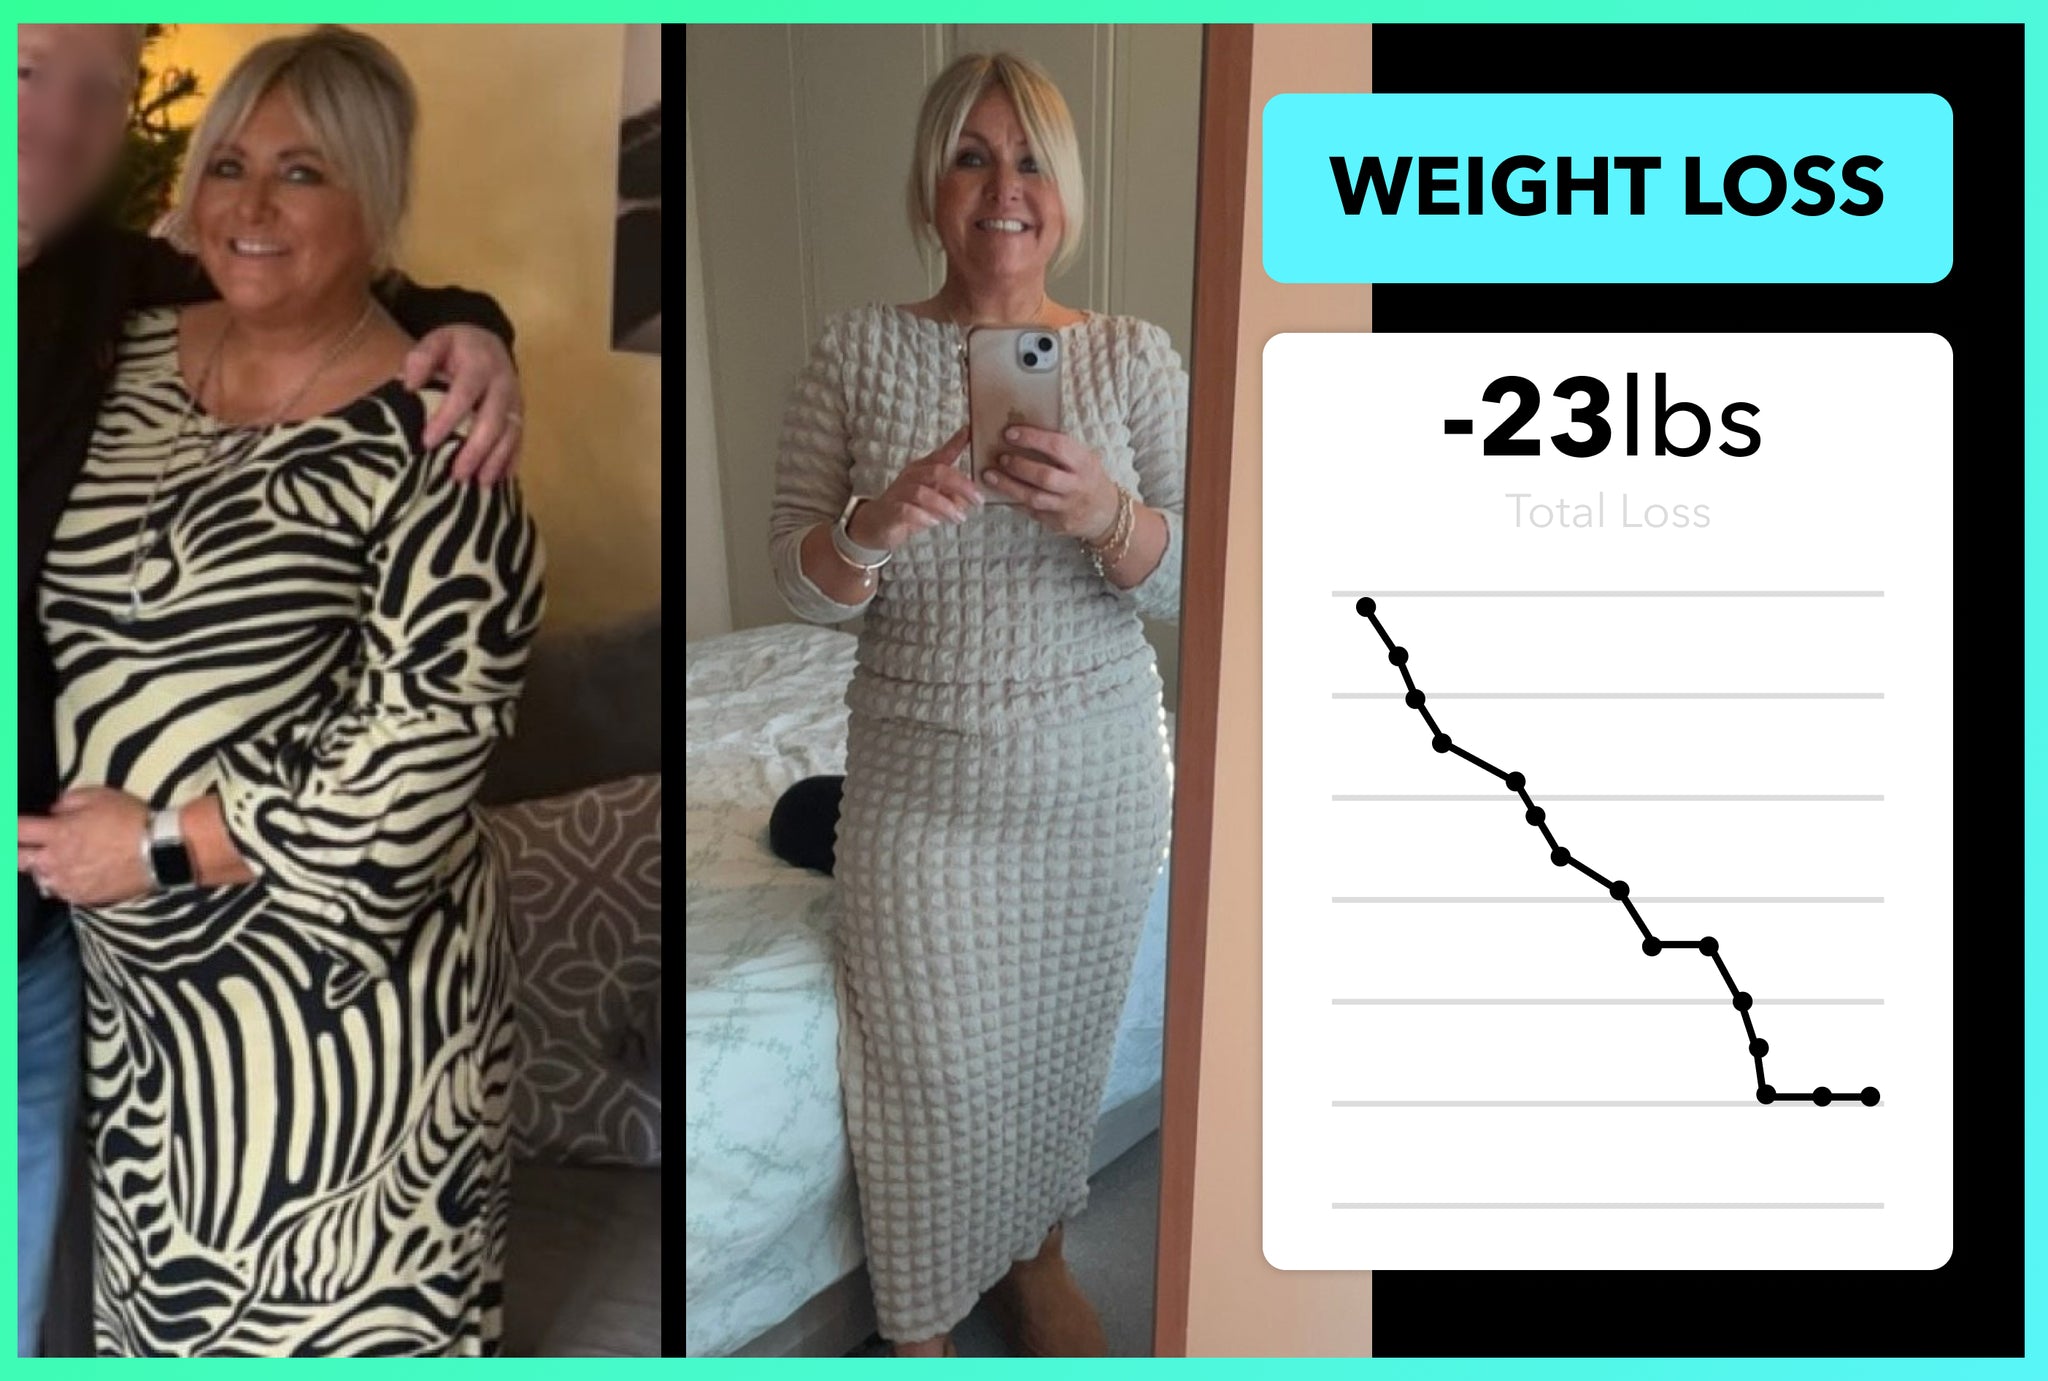 Katie has lost 23lbs with Team RH!